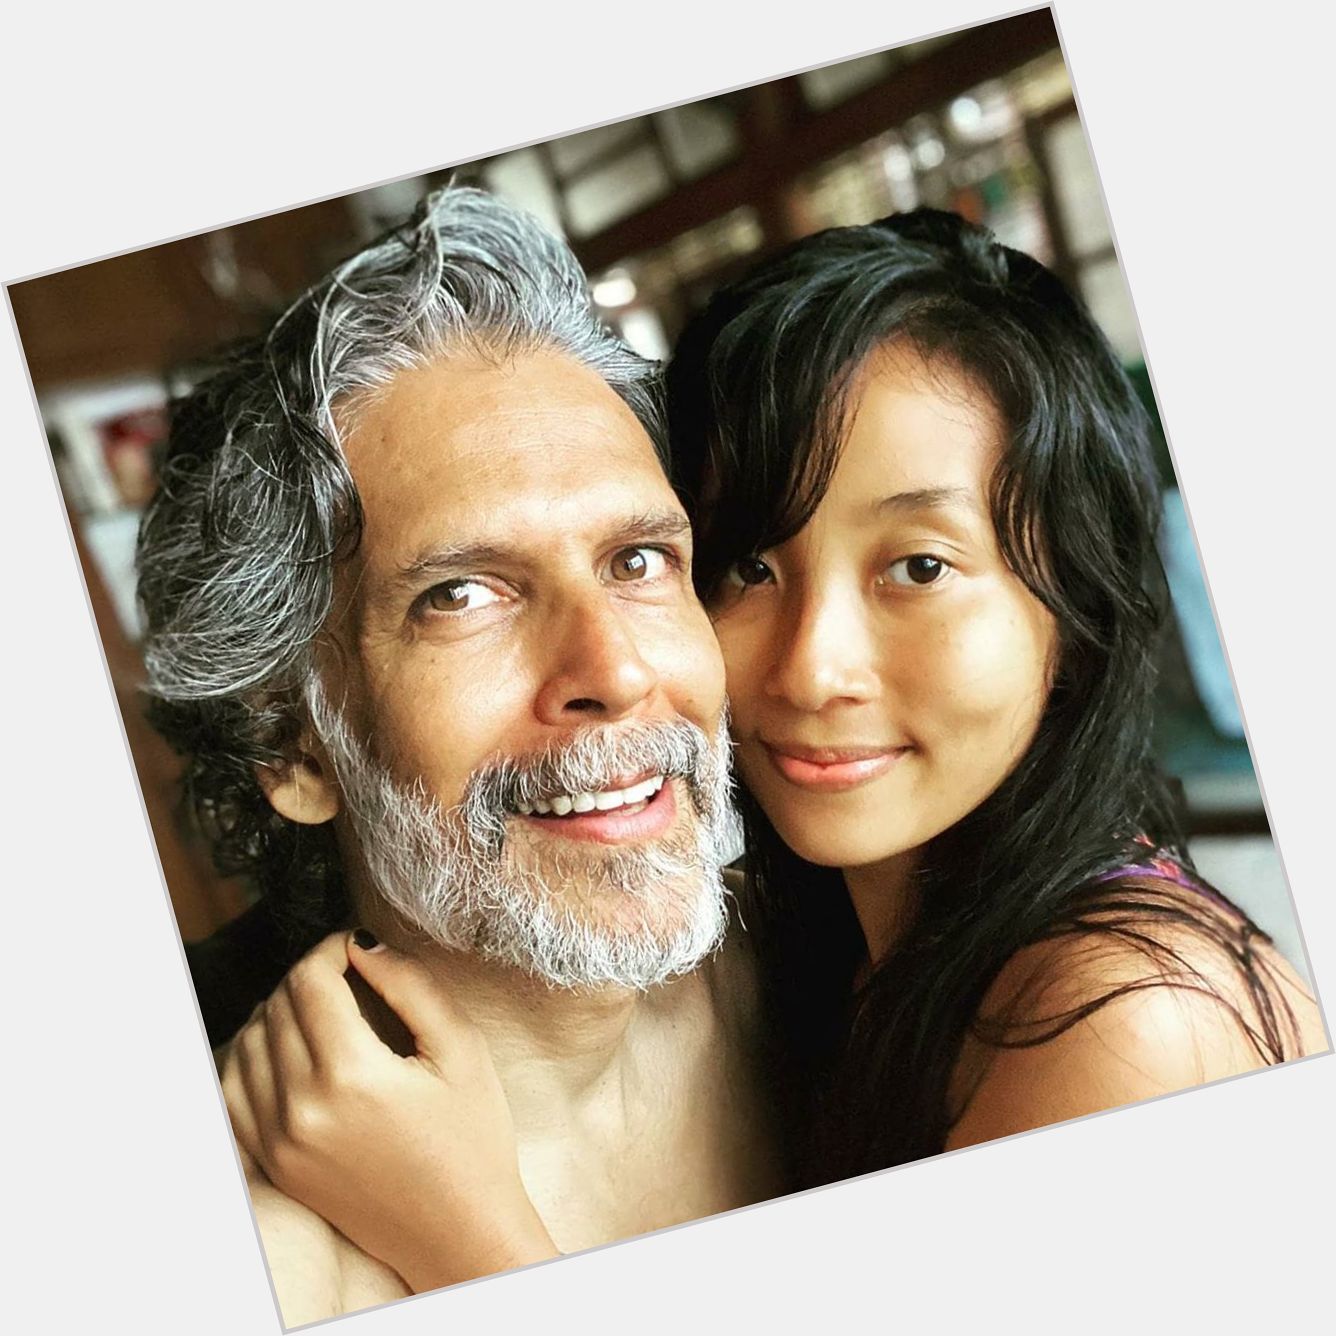 You are a giant to the youth and inspire them wish you a very happy birthday
Milind Soman 